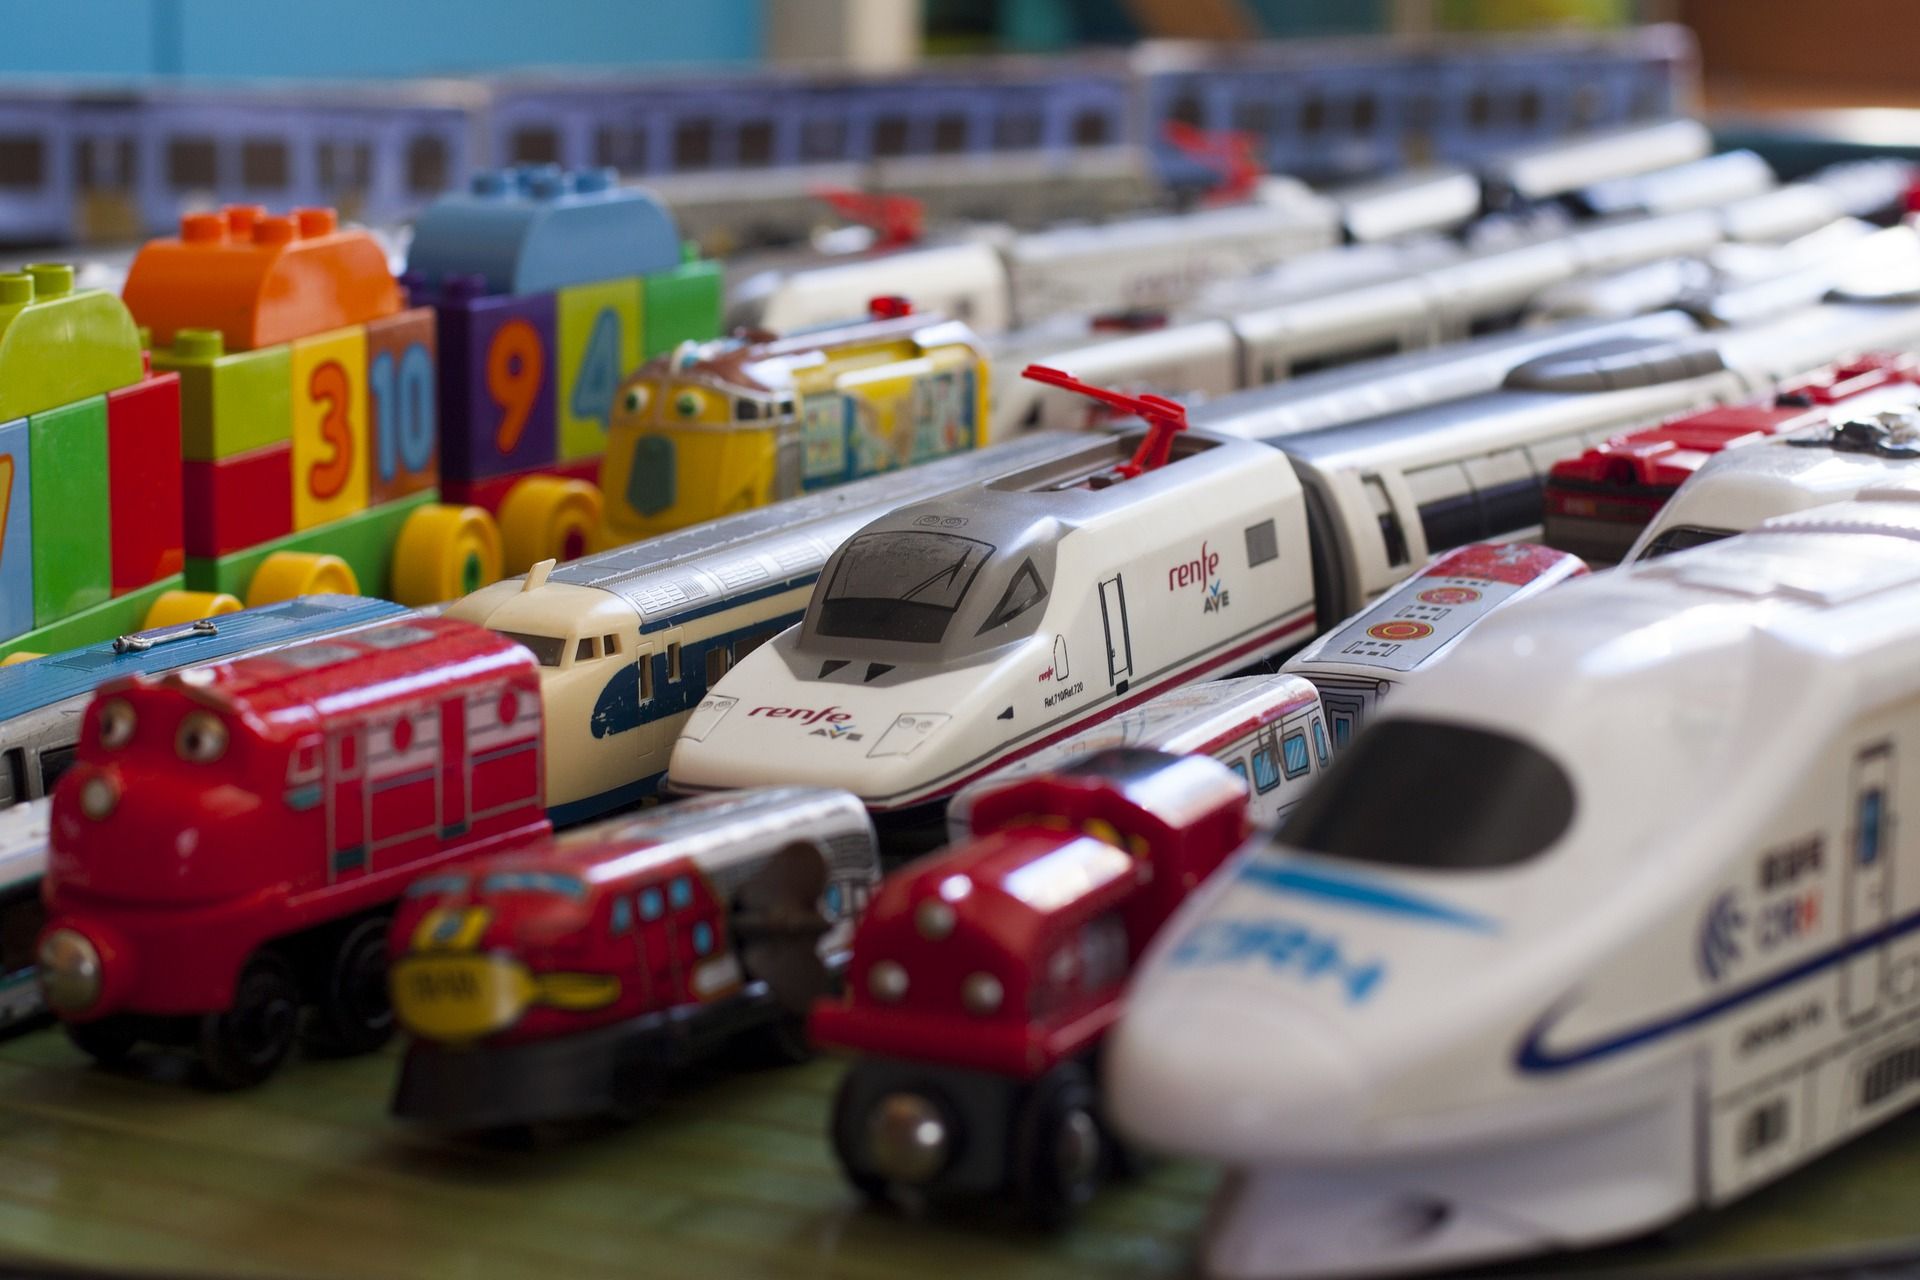 Toy trains lined up on a wooden floor